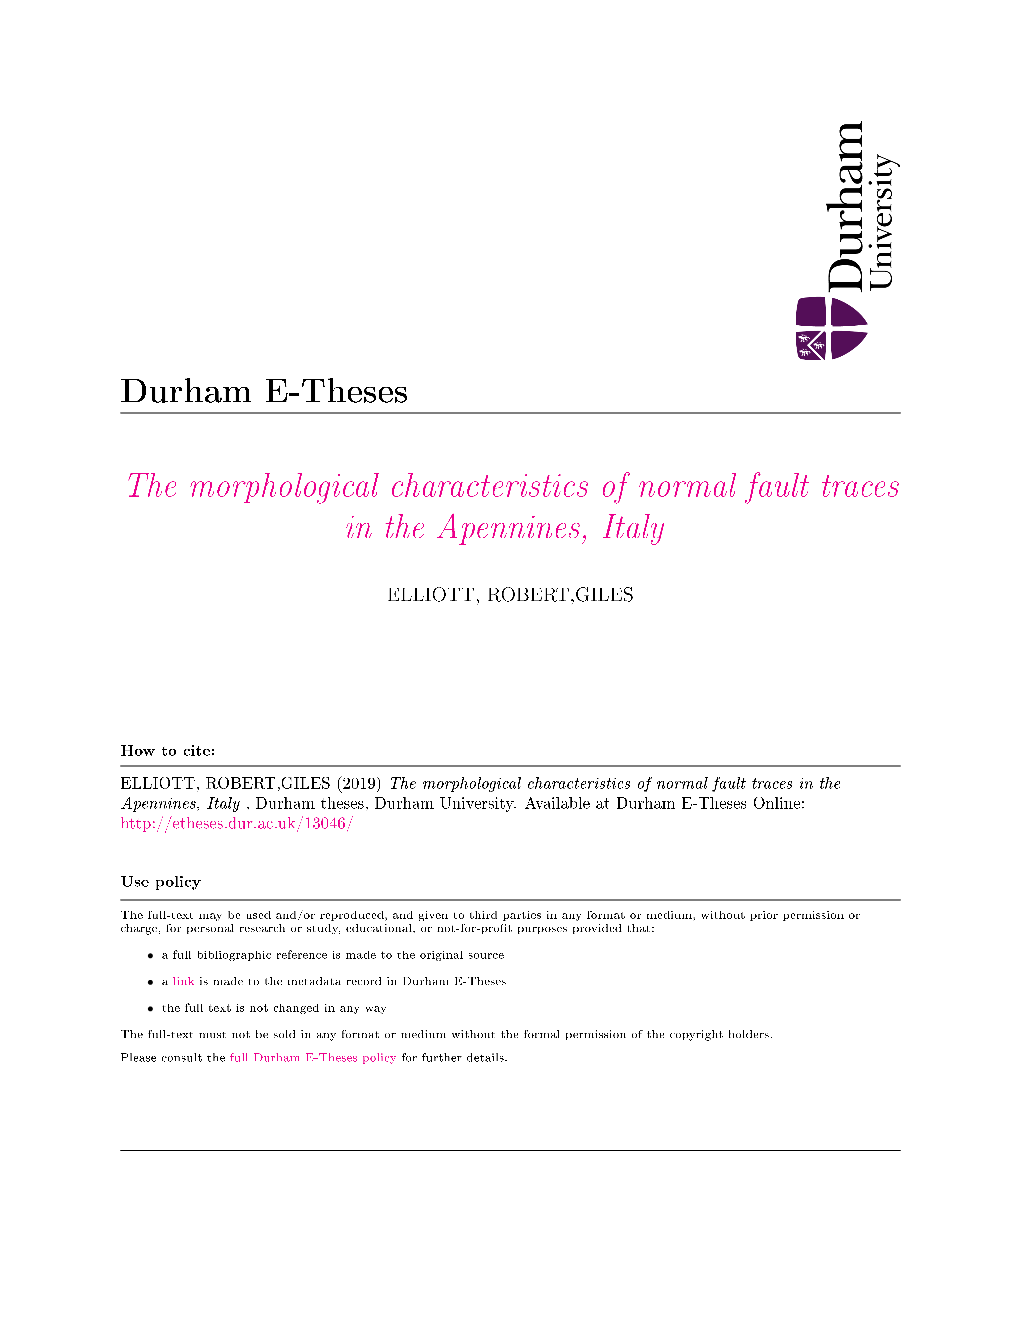 The Morphological Characteristics of Normal Fault Traces in the Apennines, Italy